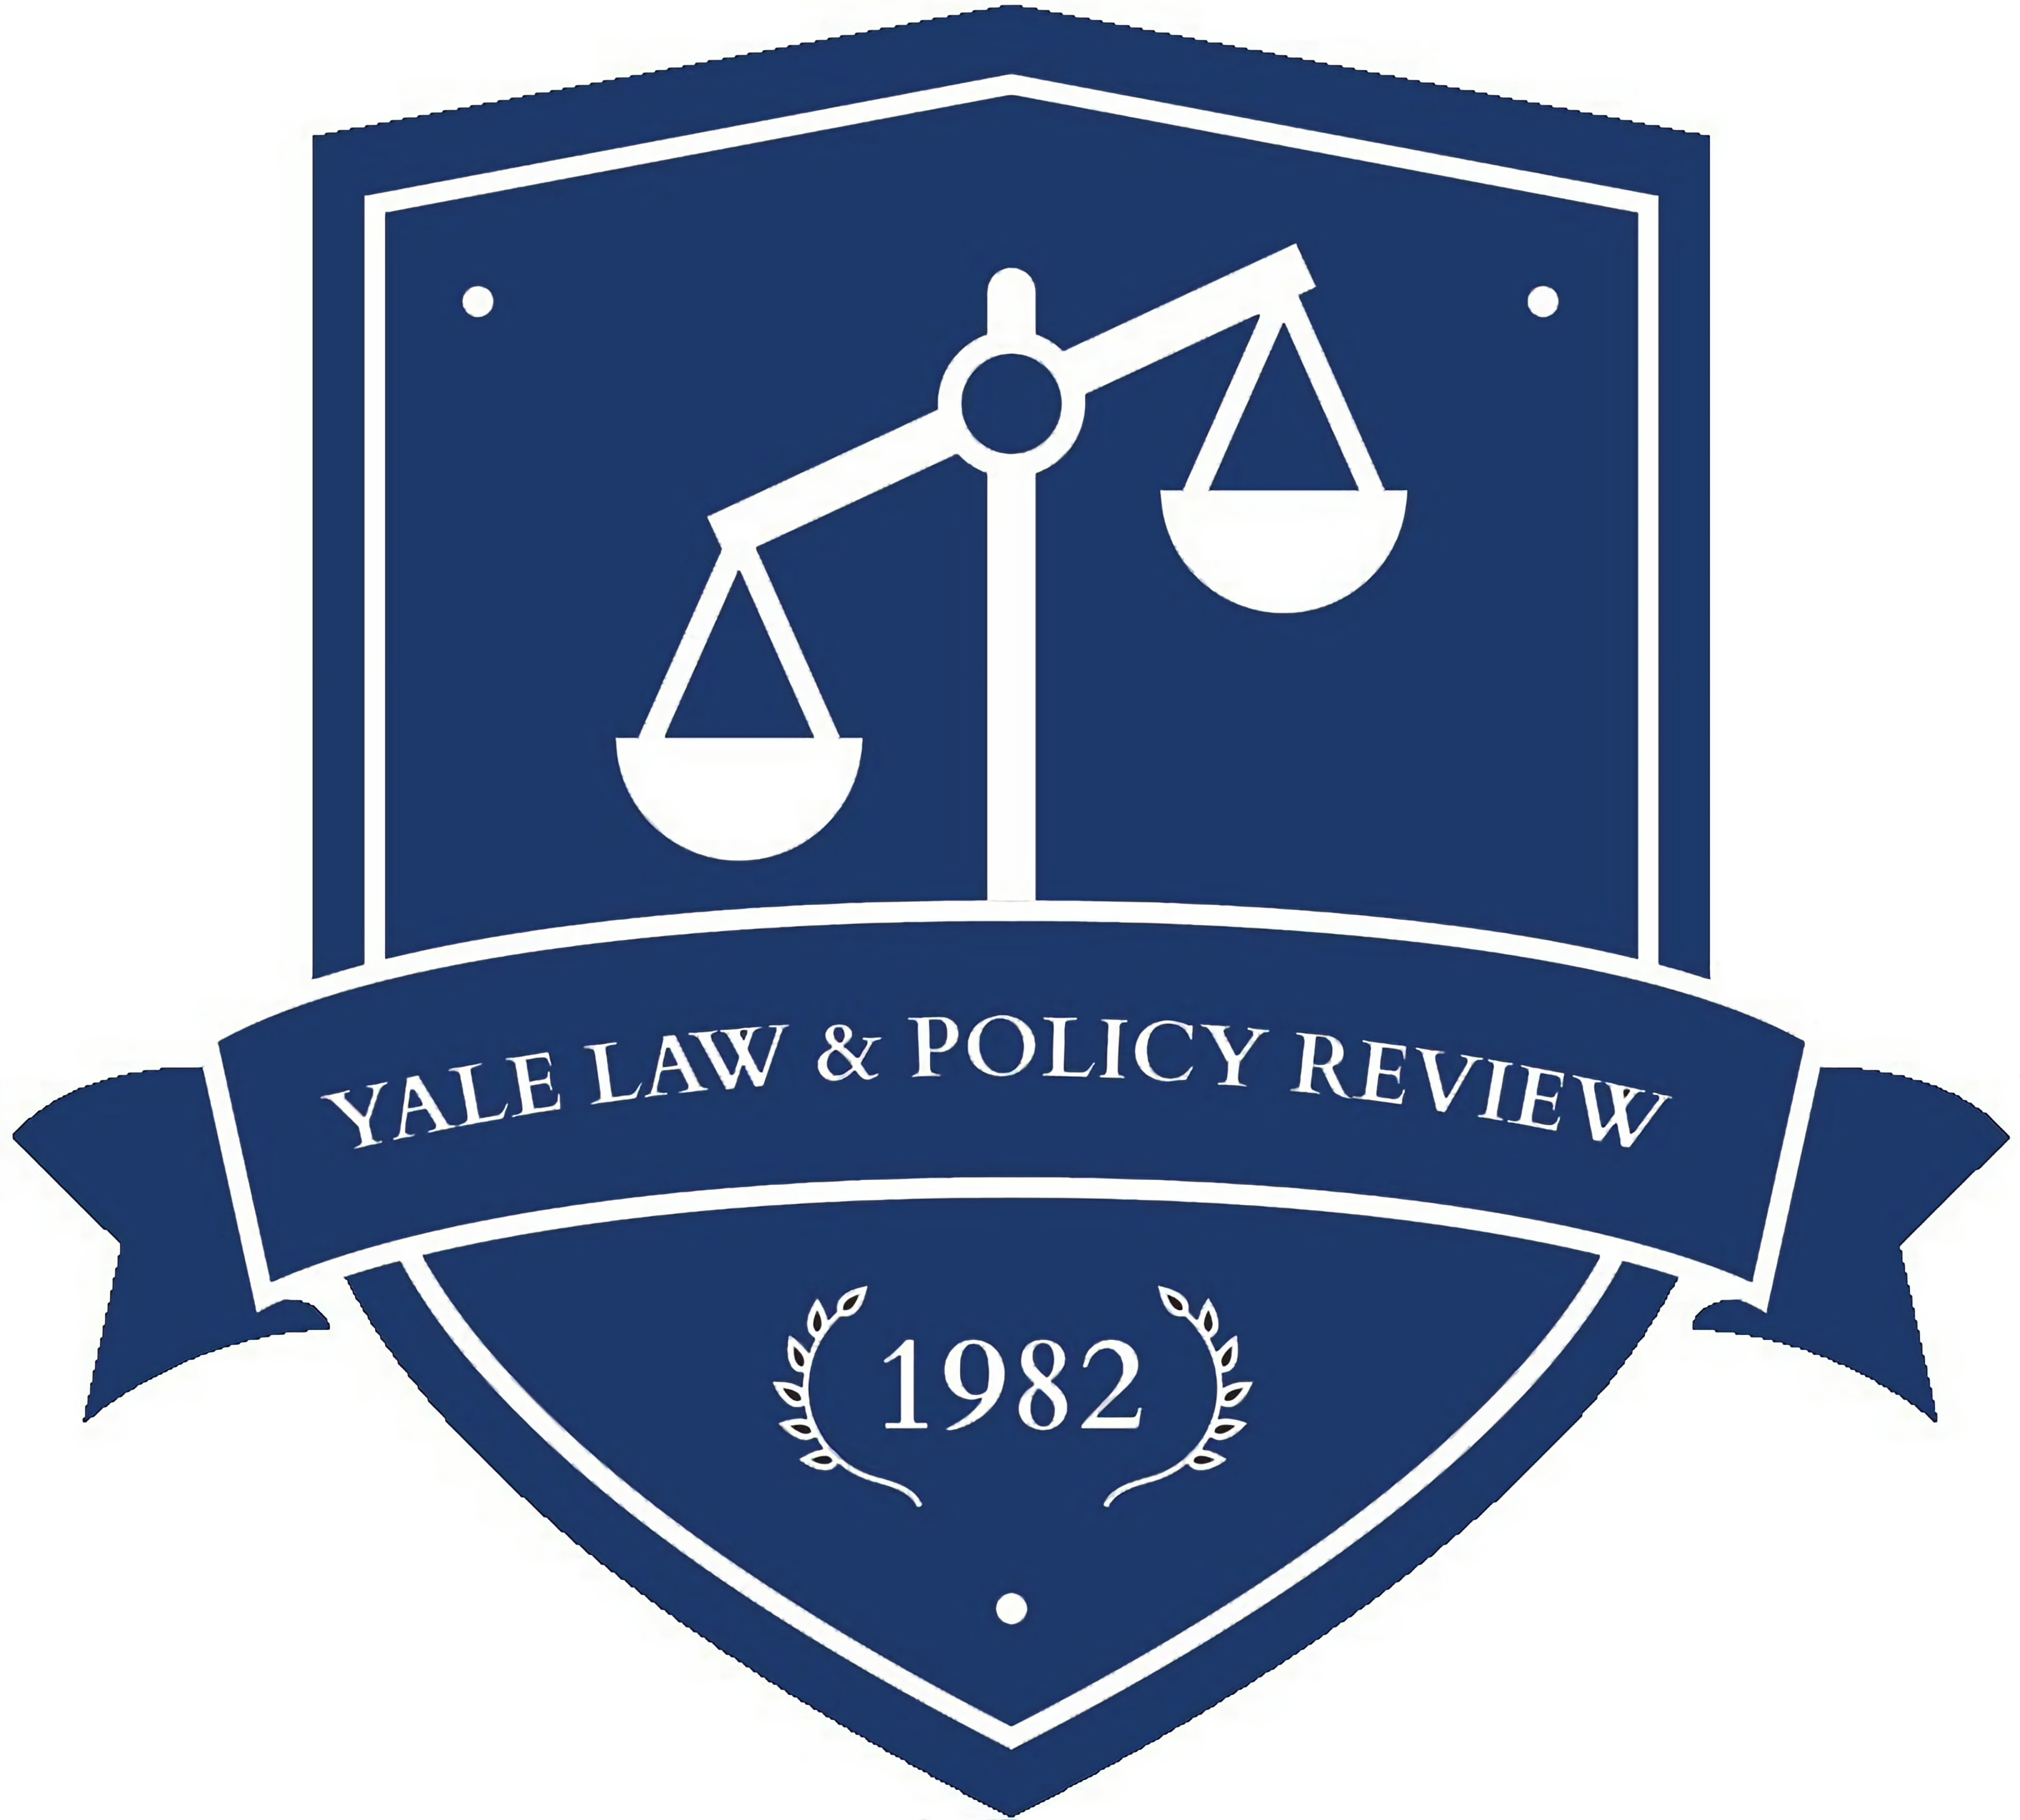 Yale Law & Policy Review
